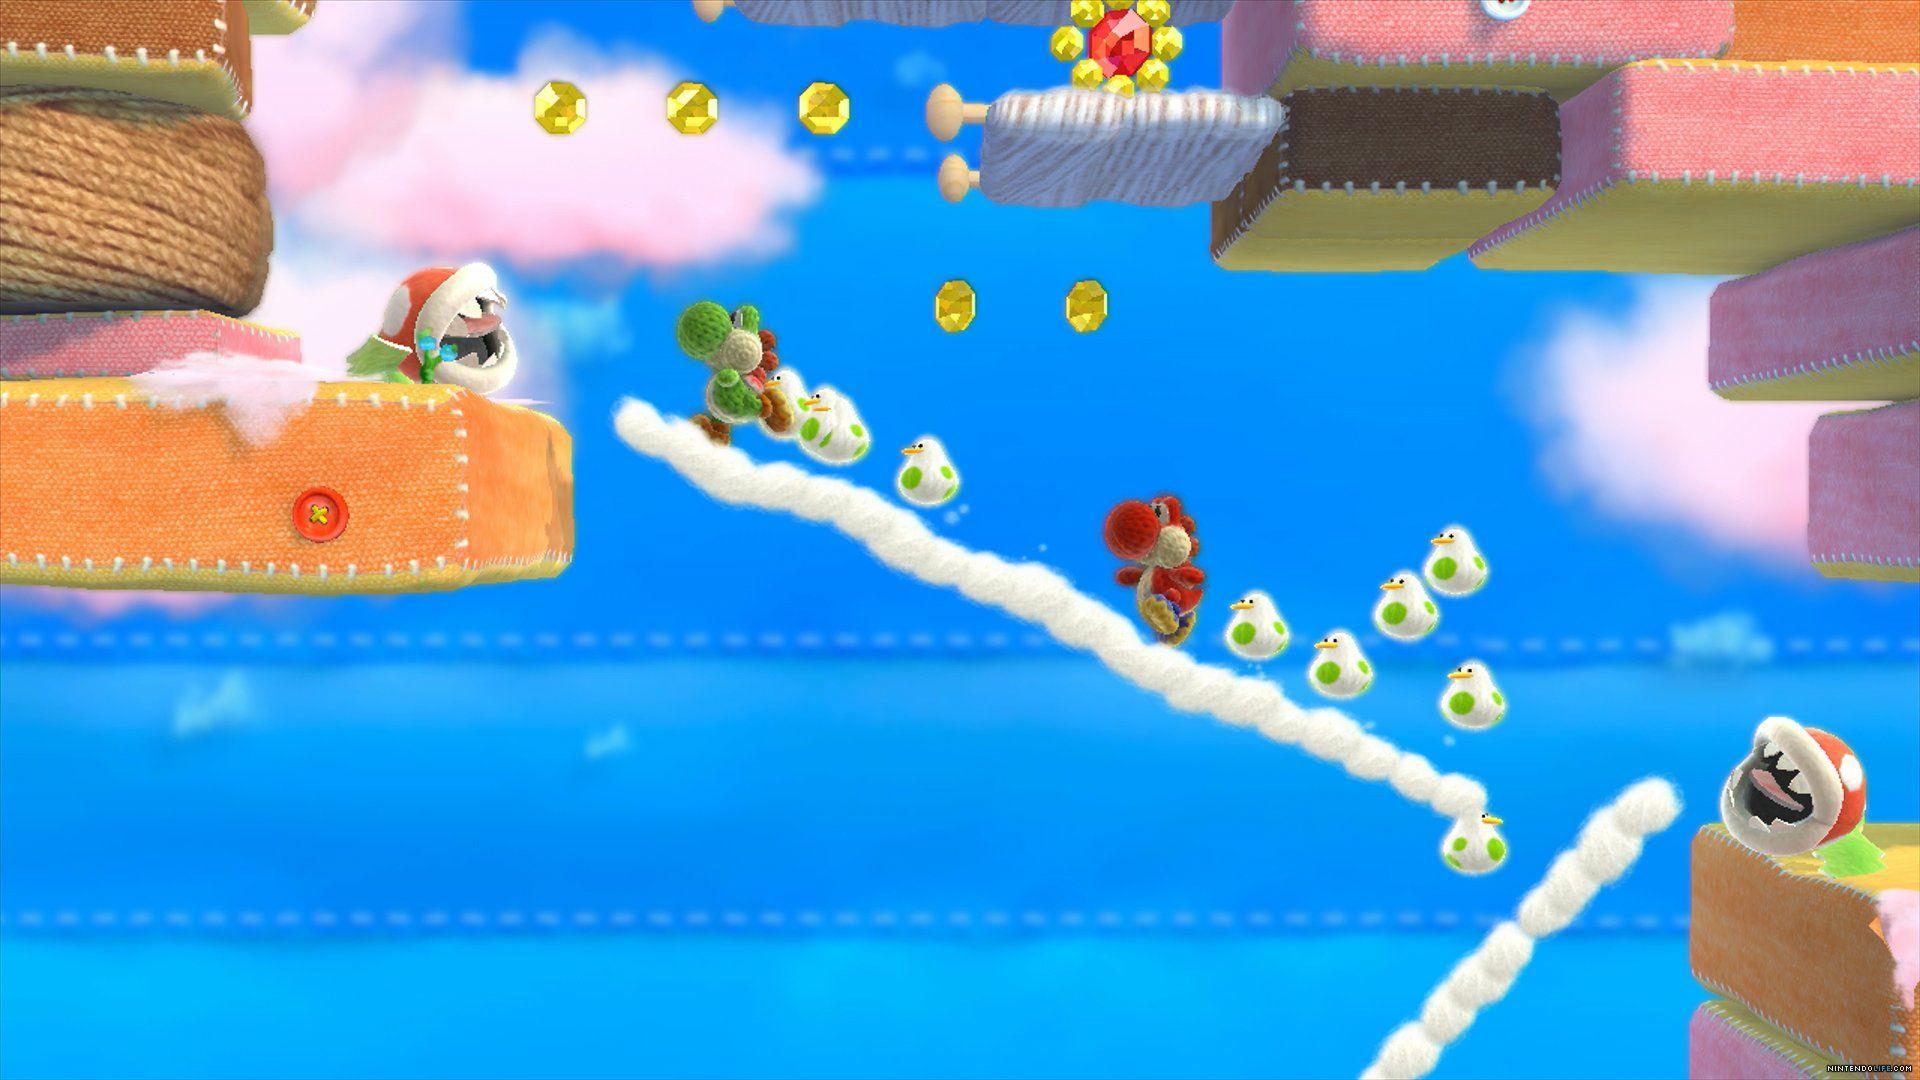 Review: Yoshi's Woolly World